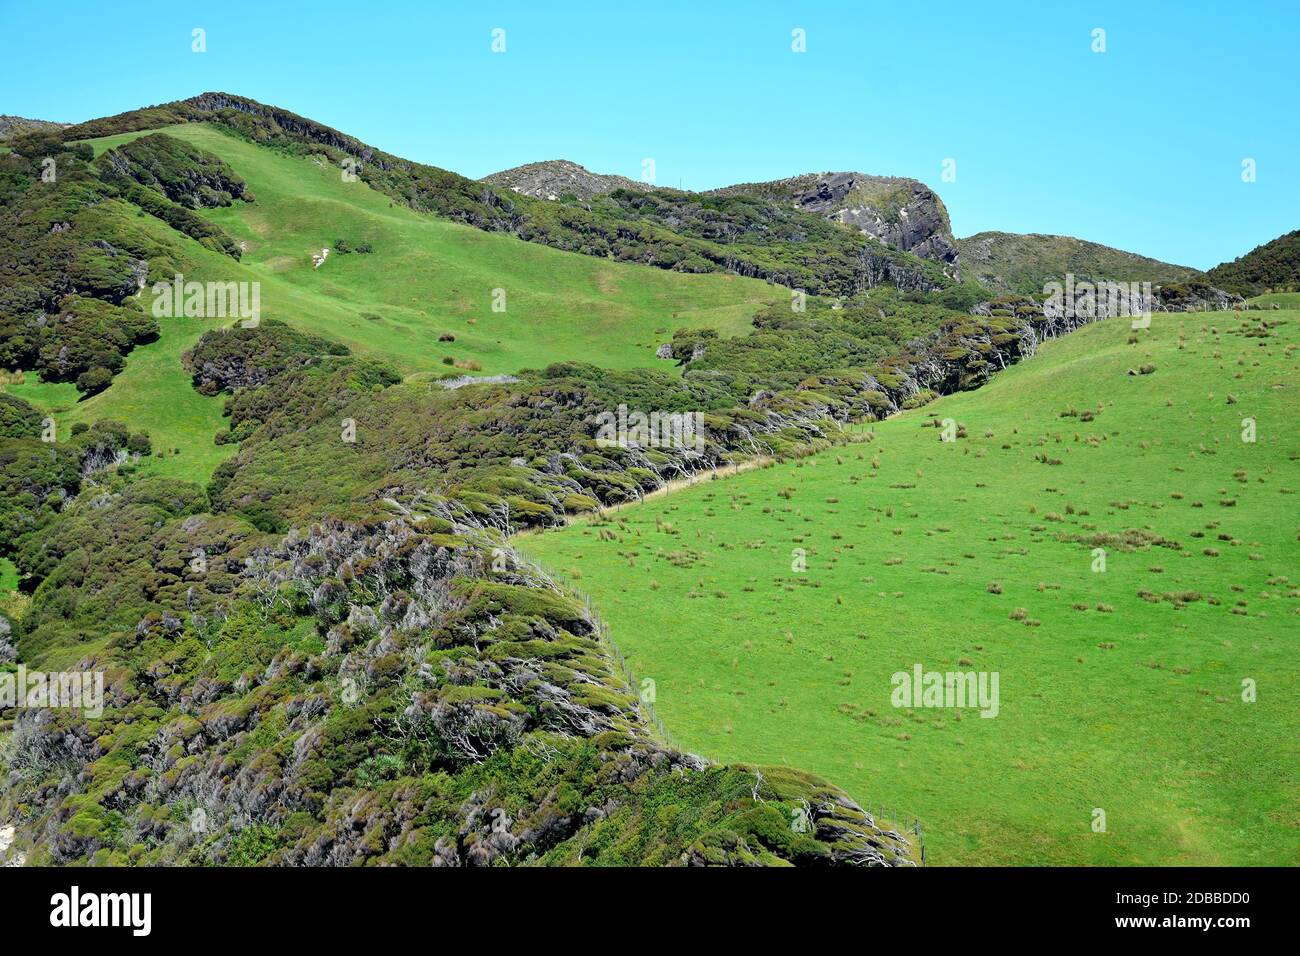 Beautiful New Zealand landscape with green hills and manuka trees (Leptospermum scoparium), crooked by the wind. South Island, near Cape Farewell. Stock Photo